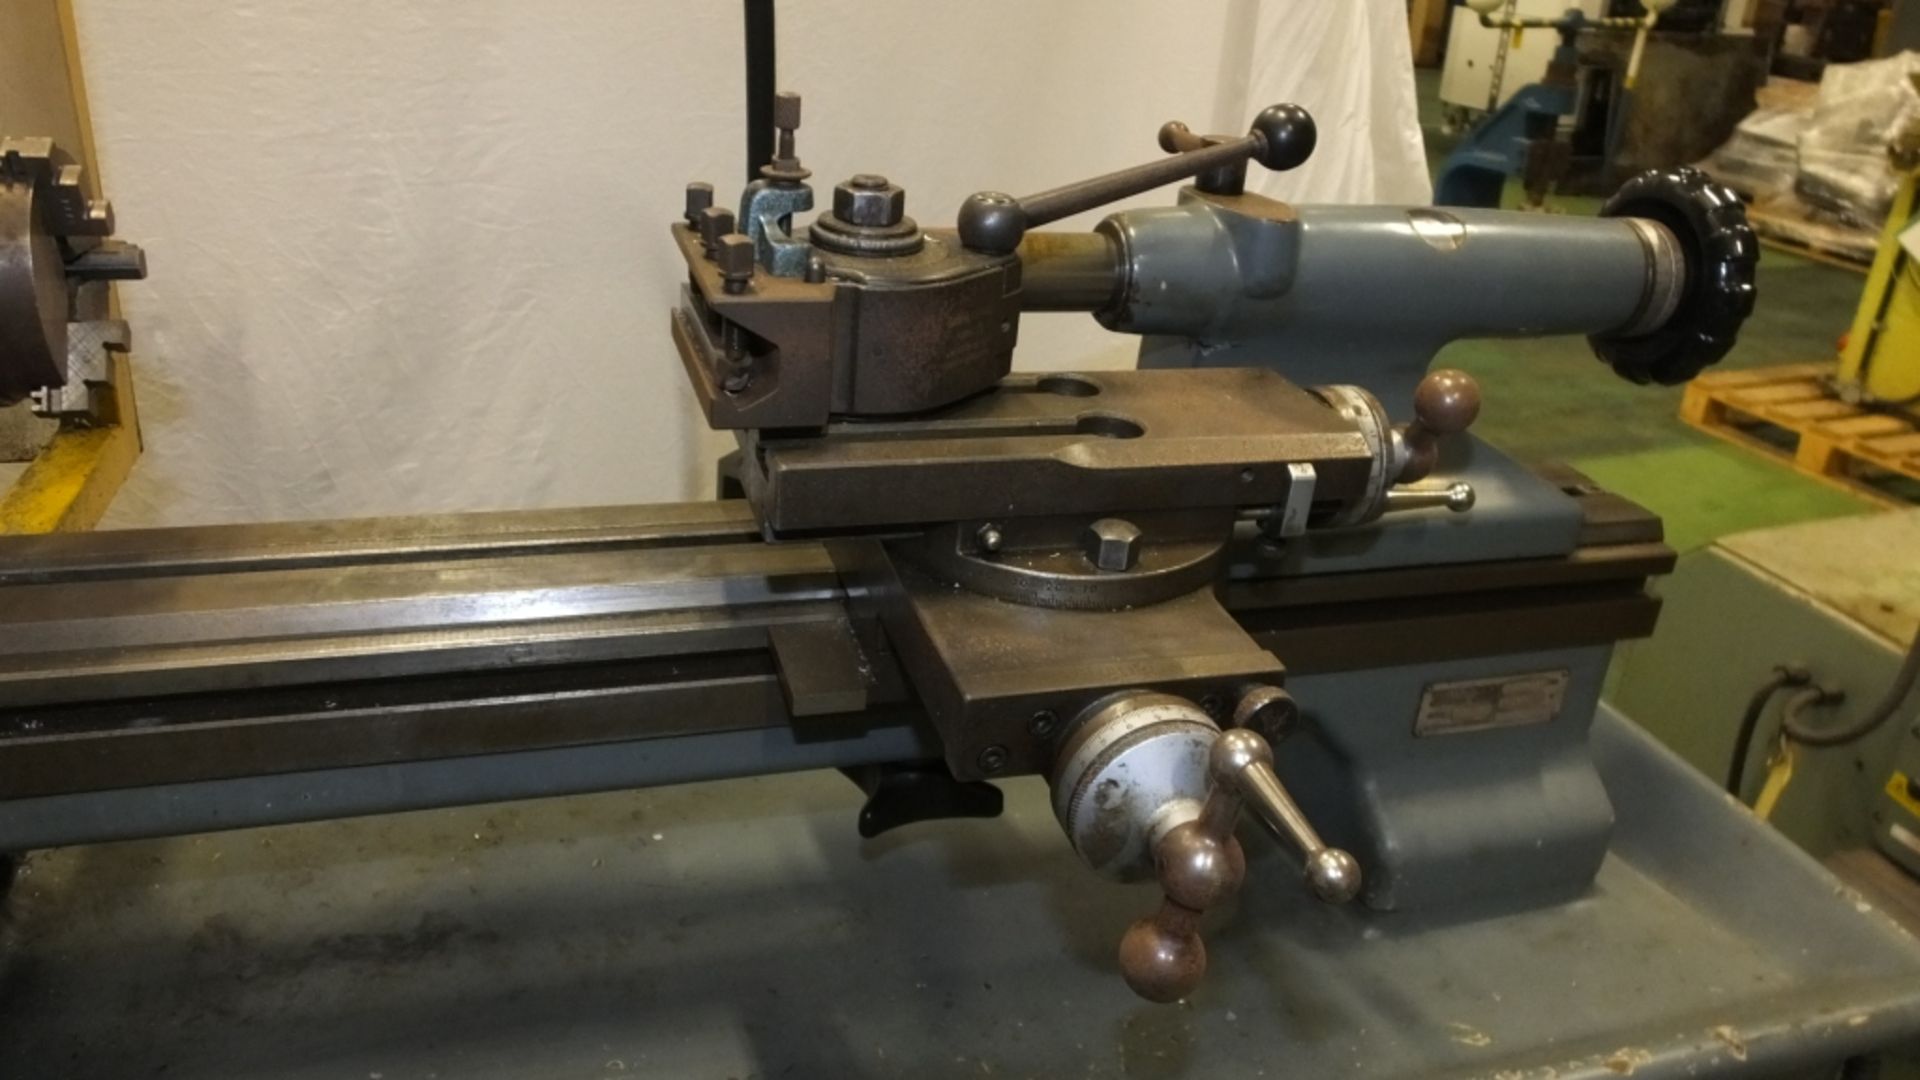 Schaublin S.A. Lathe Type 102-80 - 420V - Serial 250358 - £10 Loading Charge Applied to th - Image 3 of 15